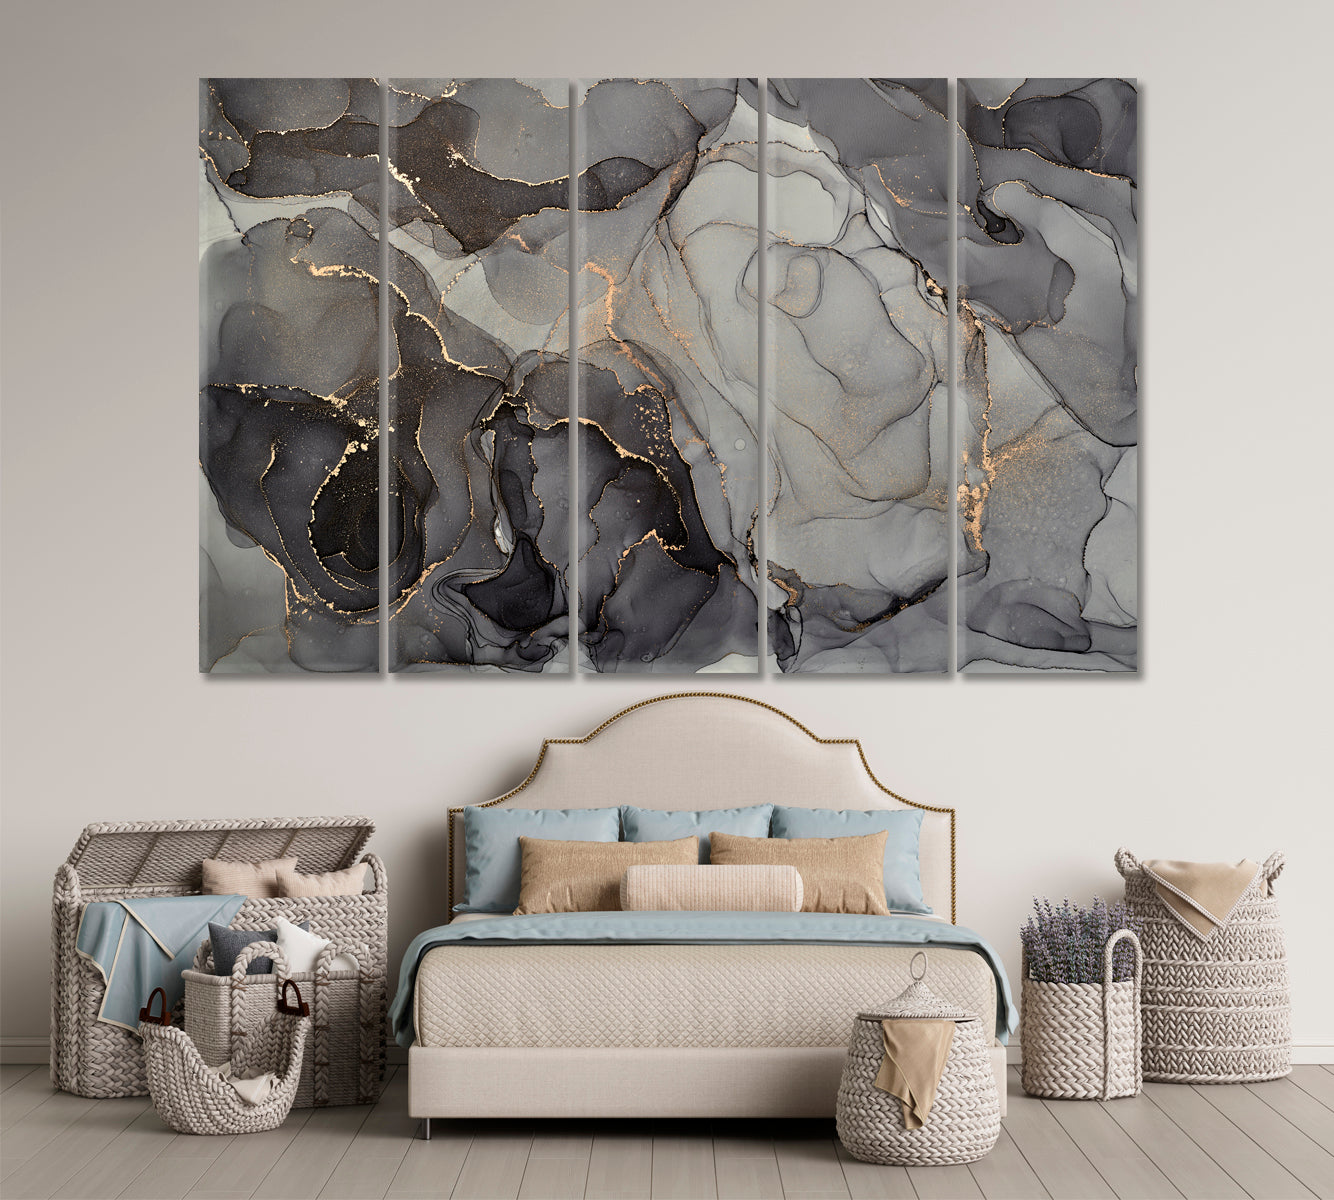 Black Gray Marble Alcohol Ink Stains Translucent Waves Fluid Art, Oriental Marbling Canvas Print Artesty 5 panels 36" x 24" 